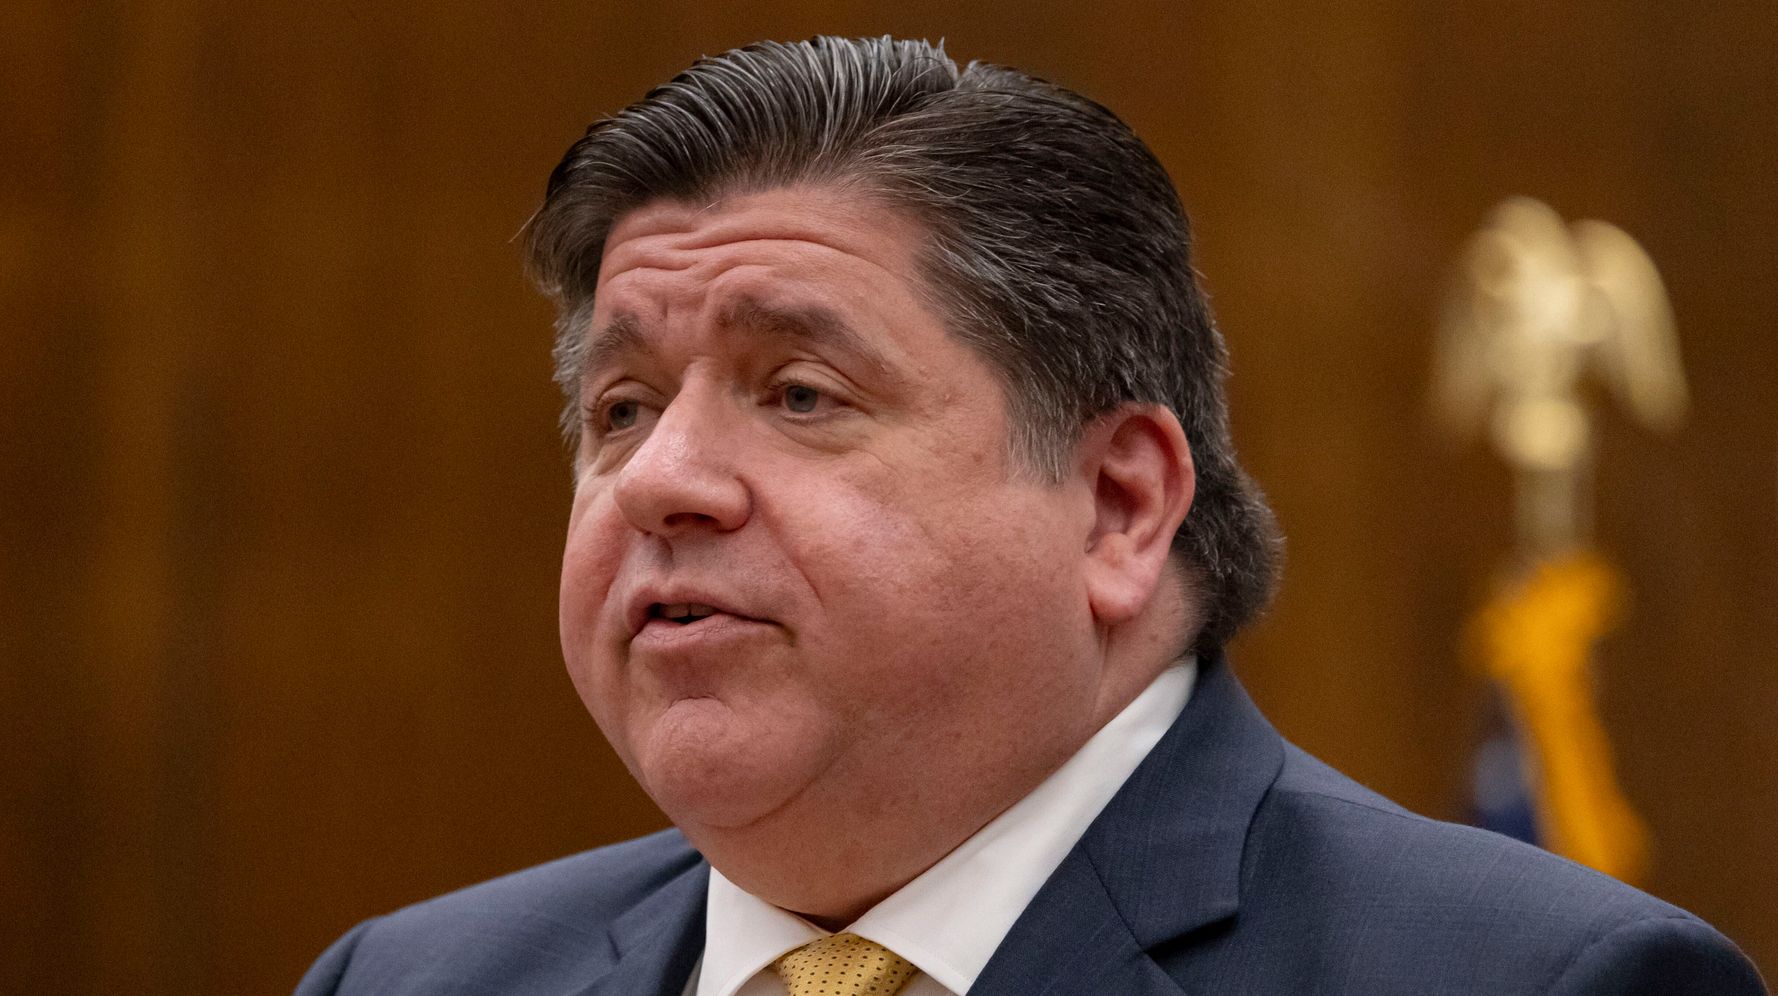 Gov. Pritzker Takes Abortion Rights Fight National With Self-Funded Group (huffpost.com)